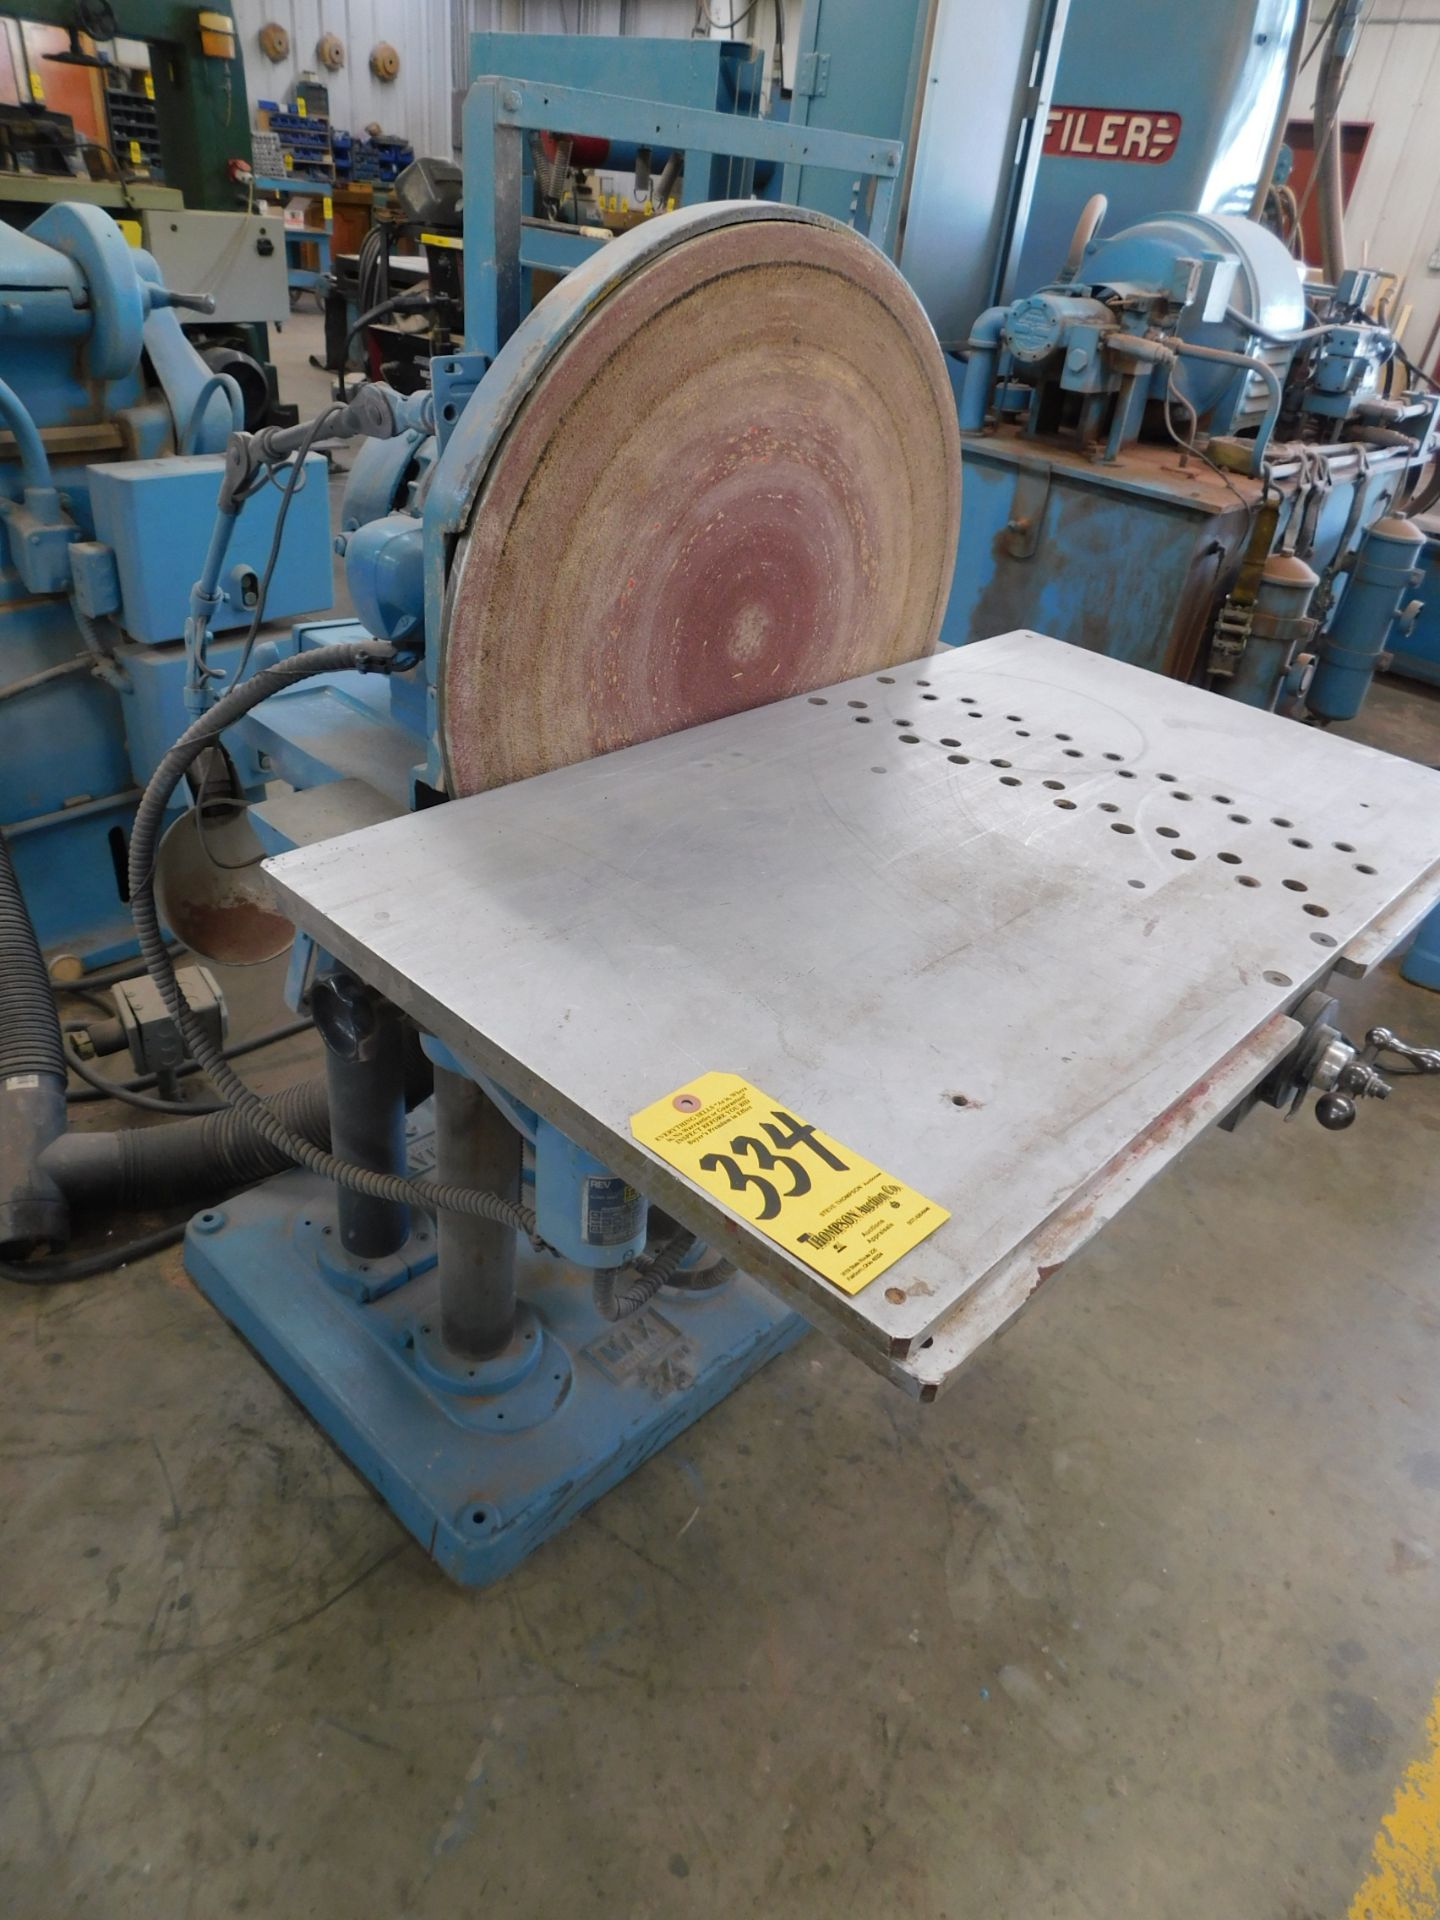 Max Universal 24" Disc Sander with Micrometer Infeed Table, 2 HP, 3 phs. - Image 2 of 12